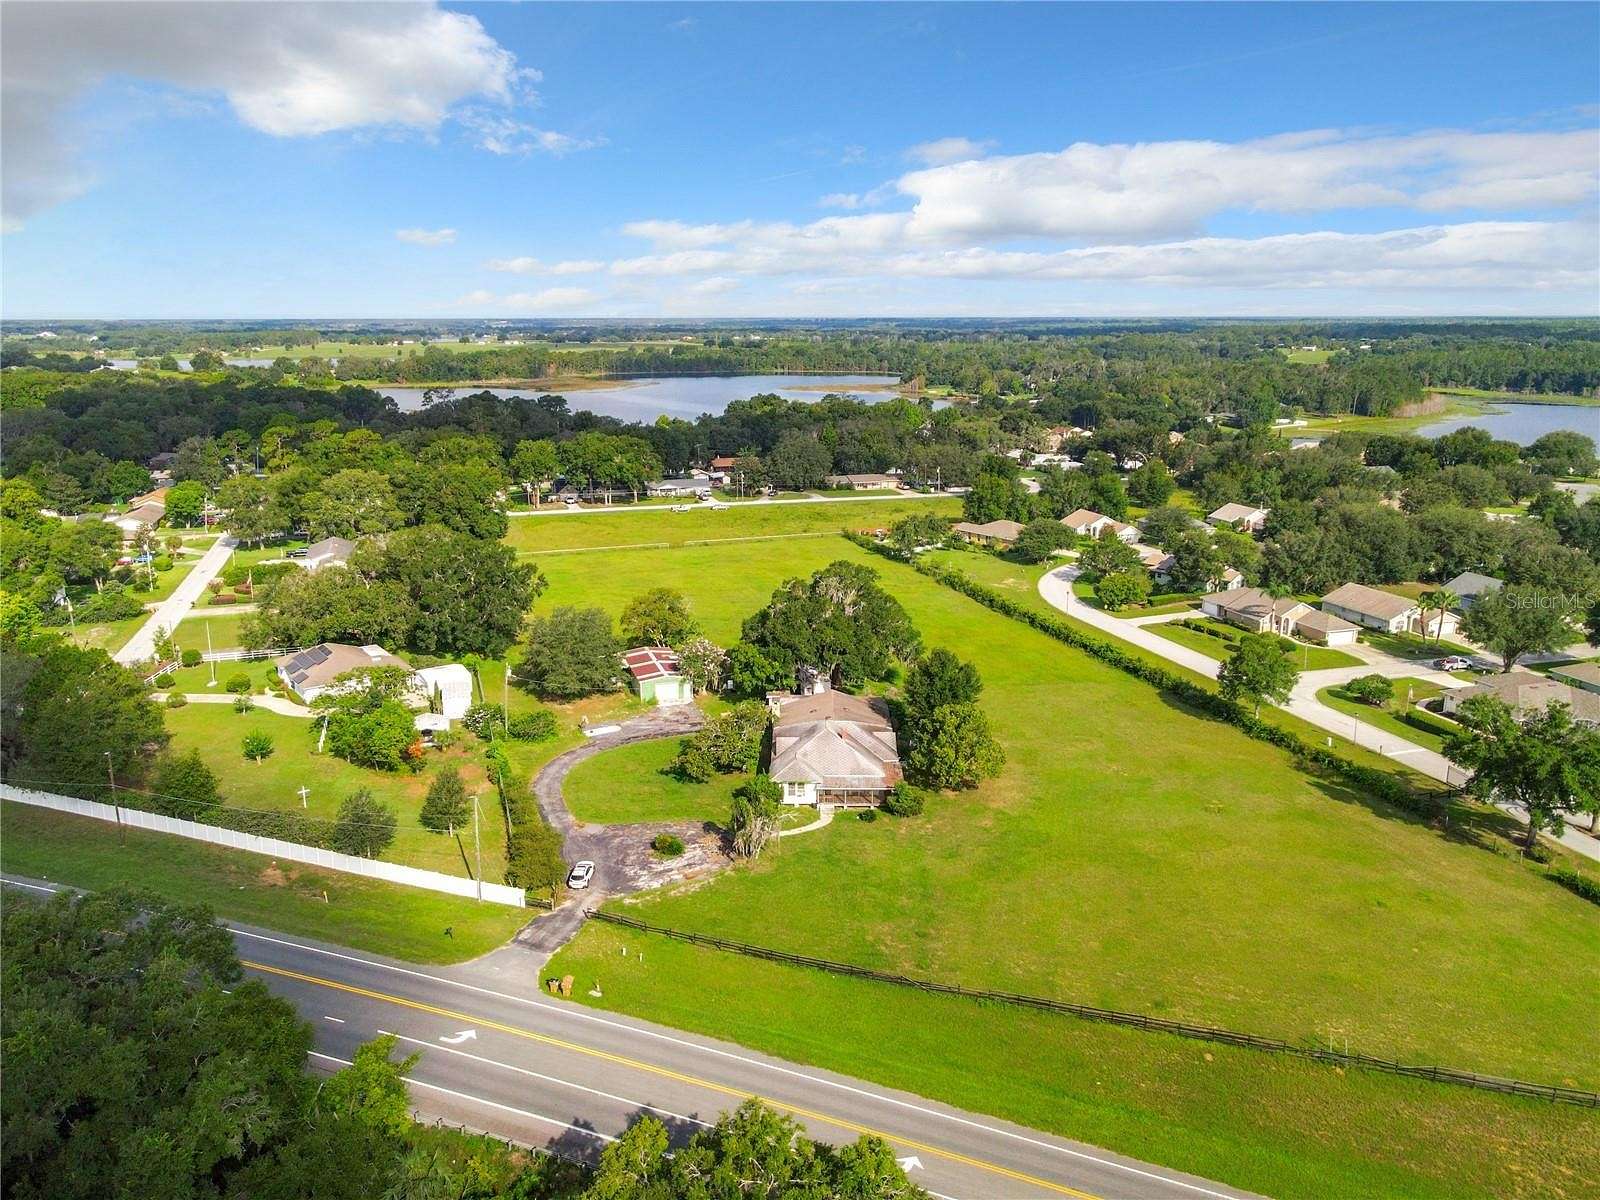 5 Acres of Improved Mixed-Use Land for Sale in Umatilla, Florida